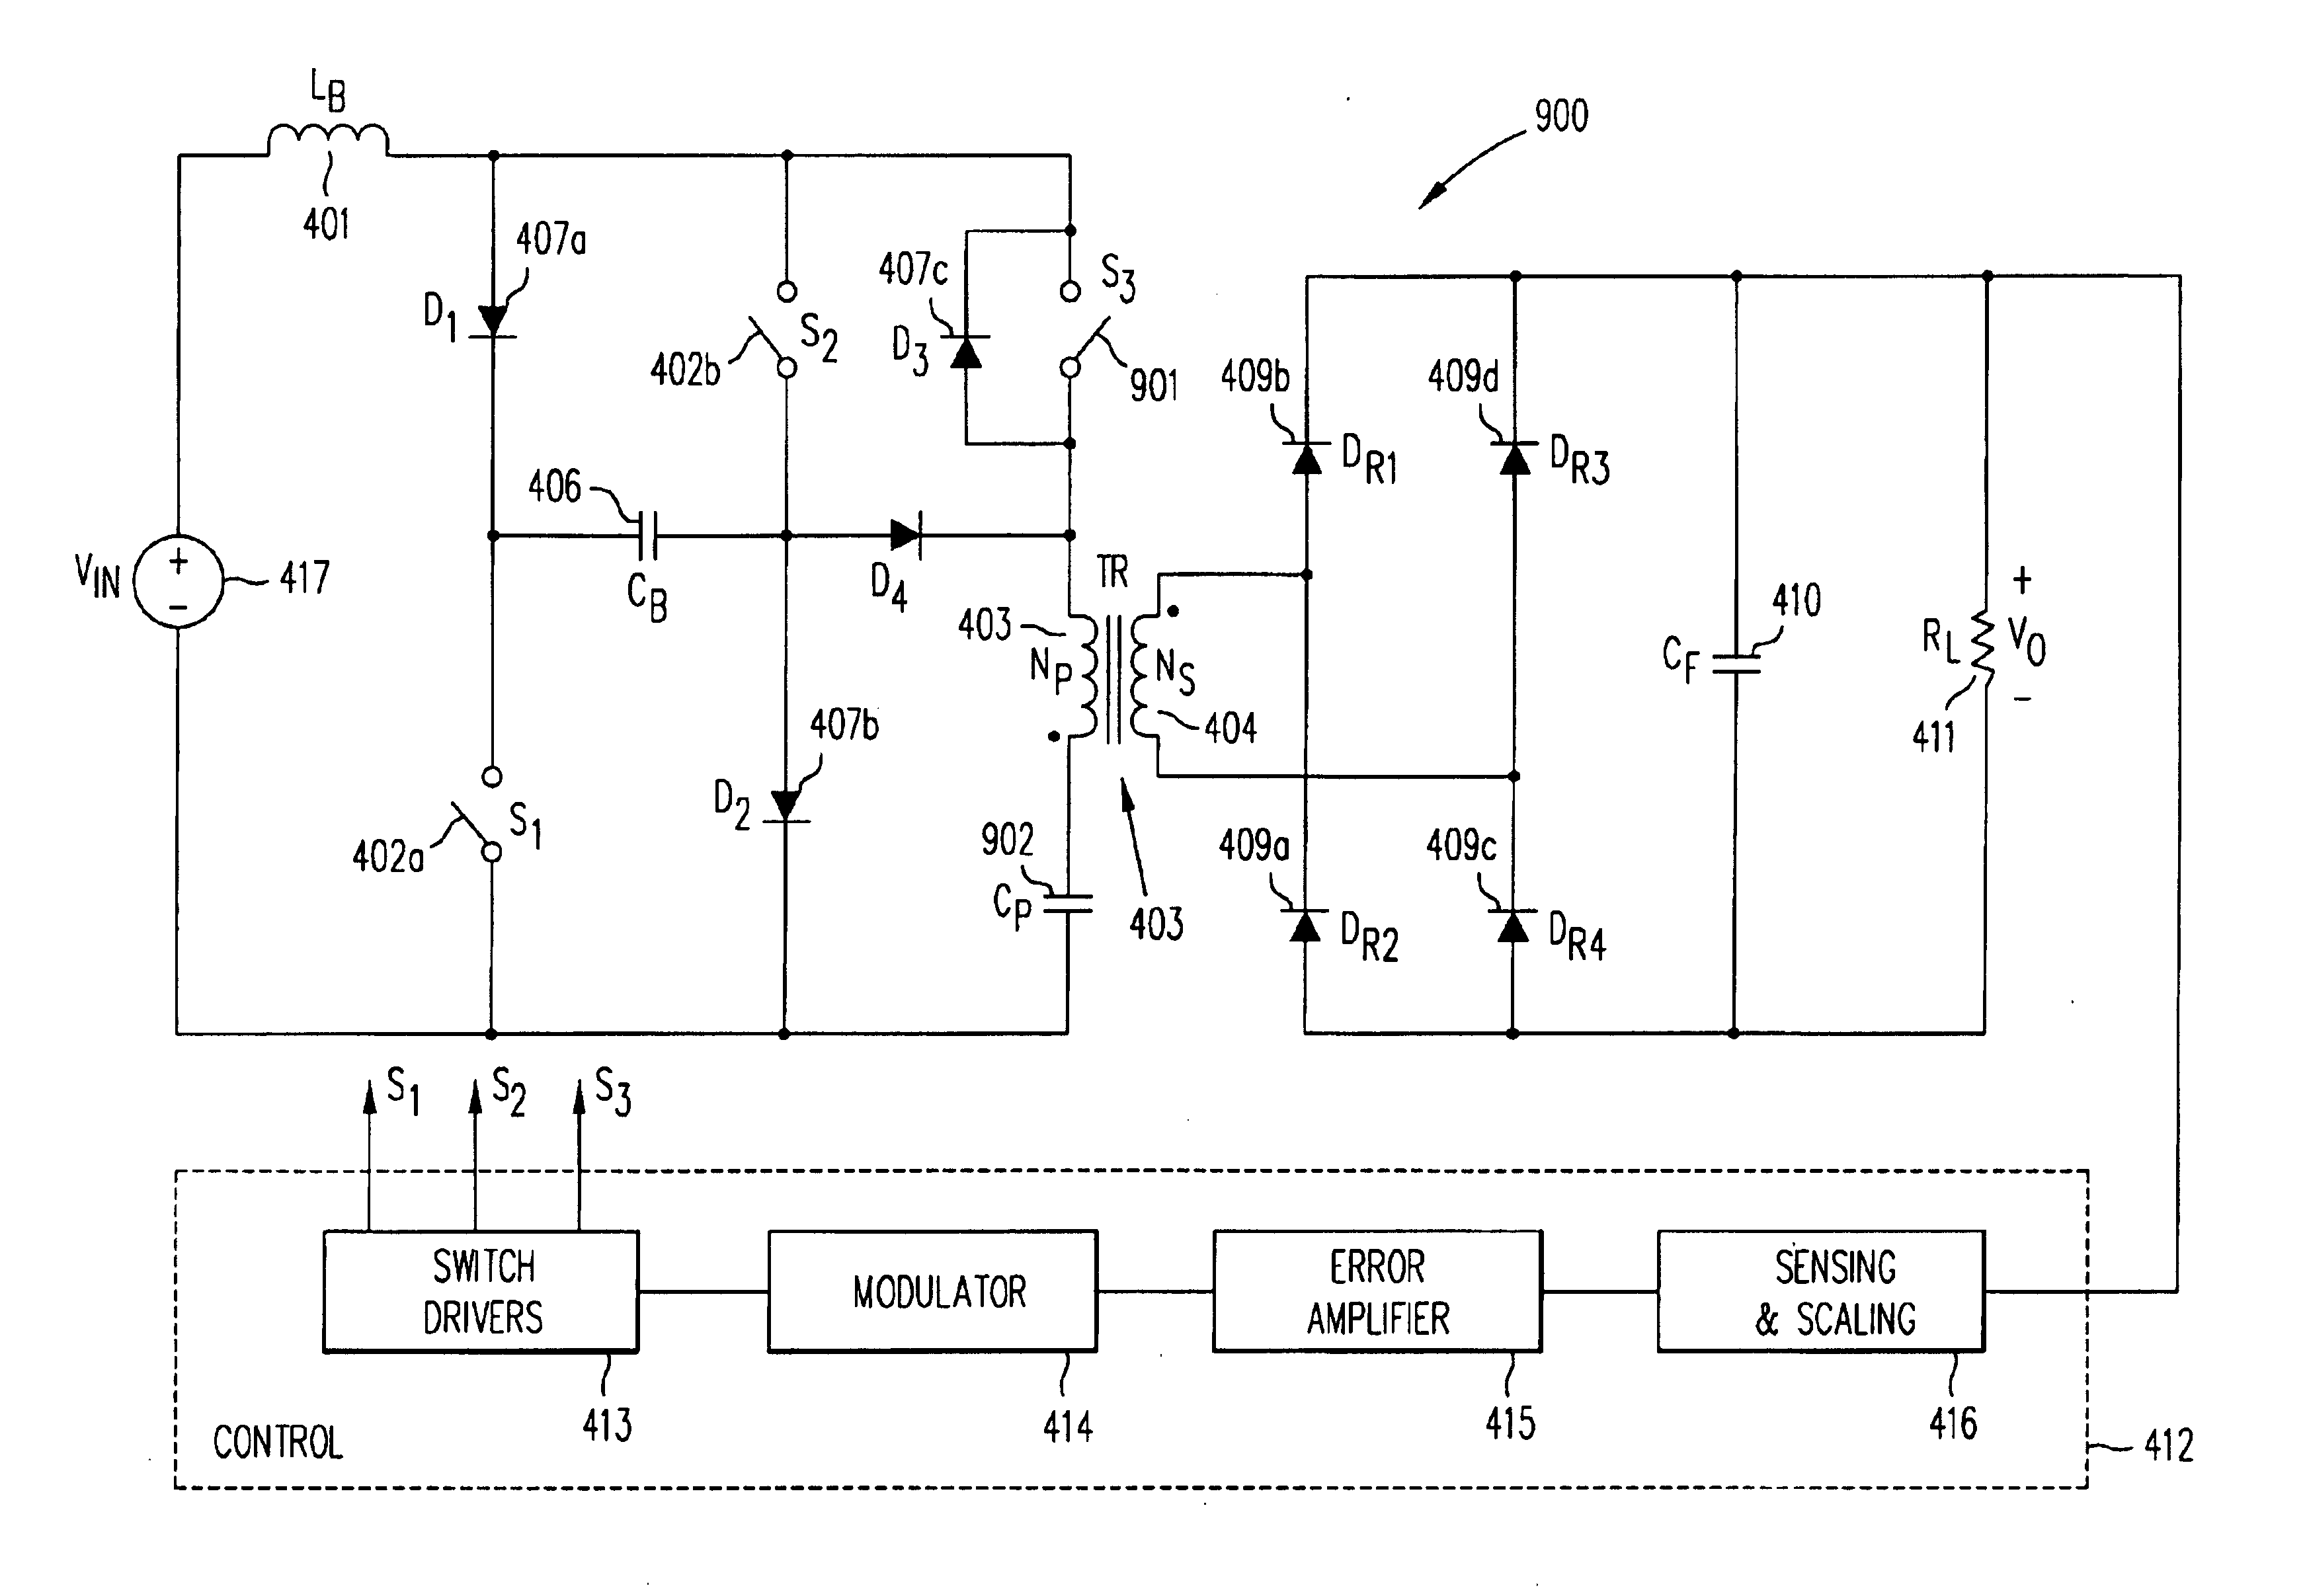 Structure and method for an isolated boost converter